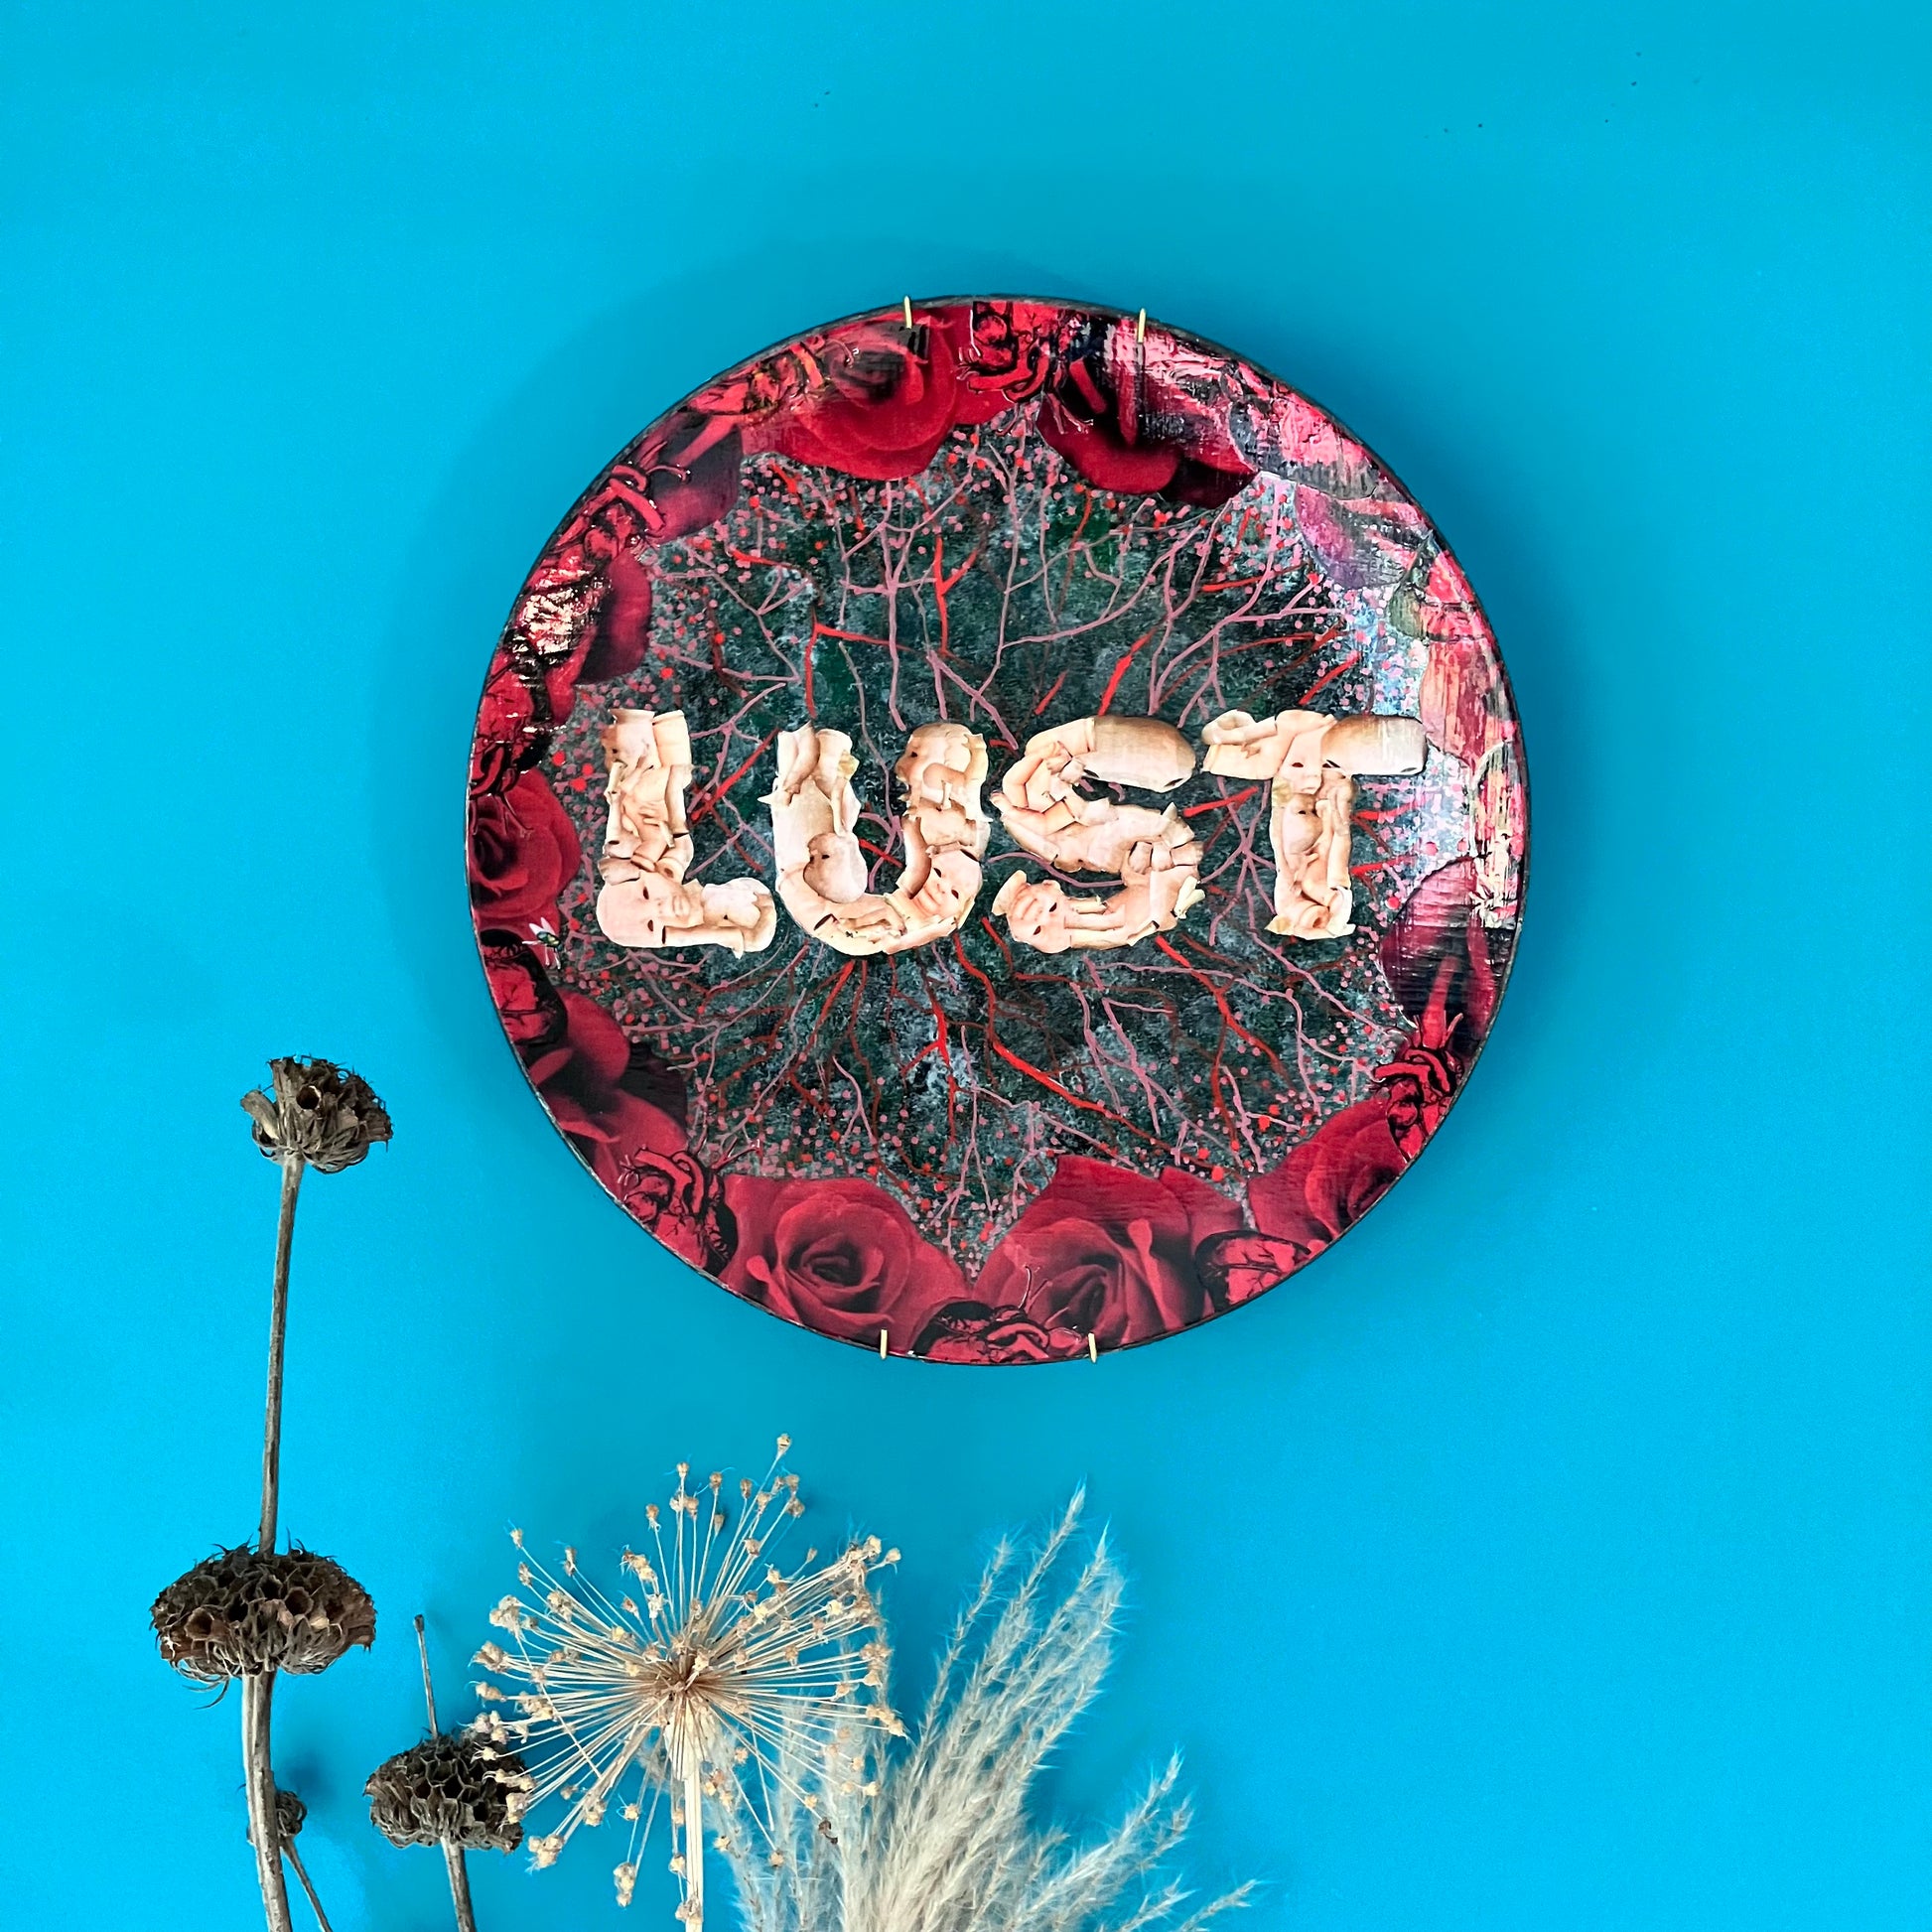 "Lust" Wall Plate by House of Frisson, featuring the word "lust" written with plastic doll parts, framed by red roses and anatomical human heart ,on a charcoal grey background with vein patterns. Lifestyle image of plate on a blue wall.